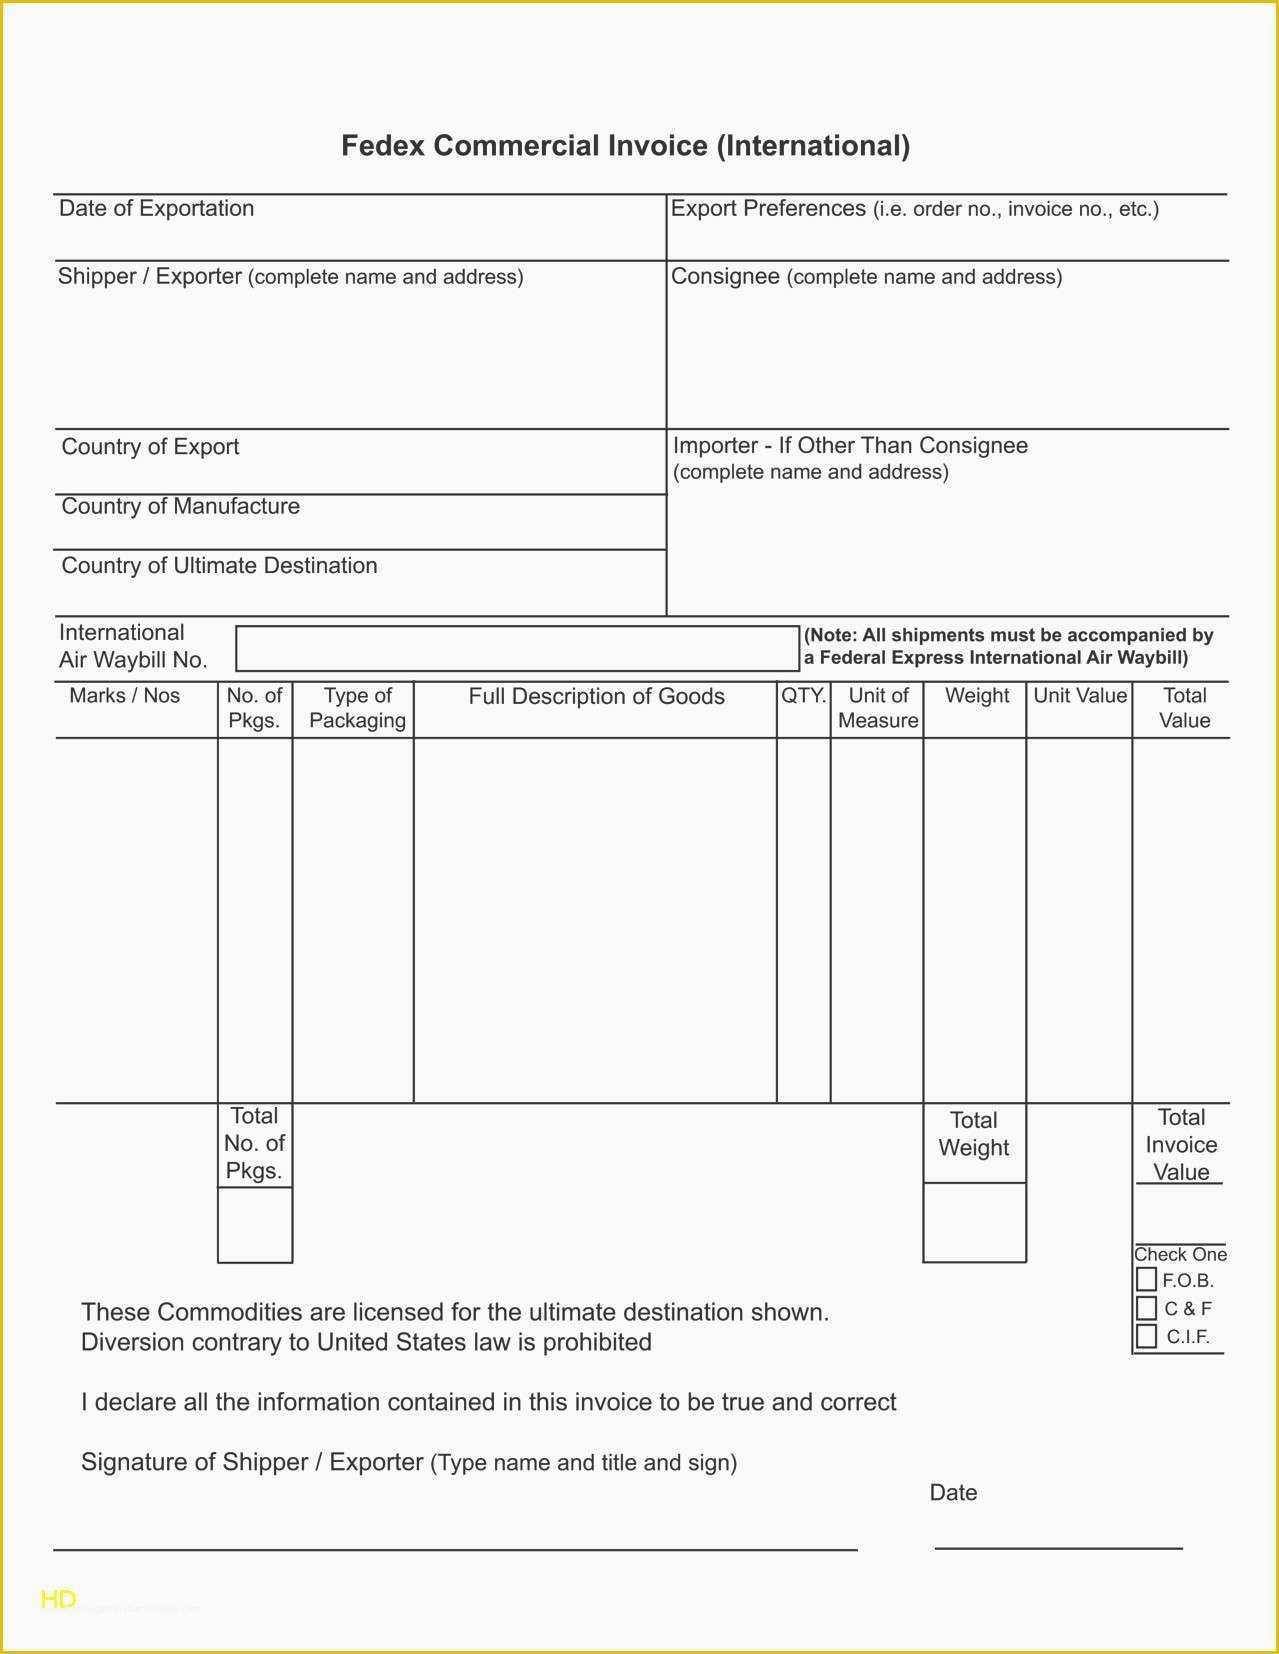 Warehouse Receipt Template Free Of Goods Receiving form